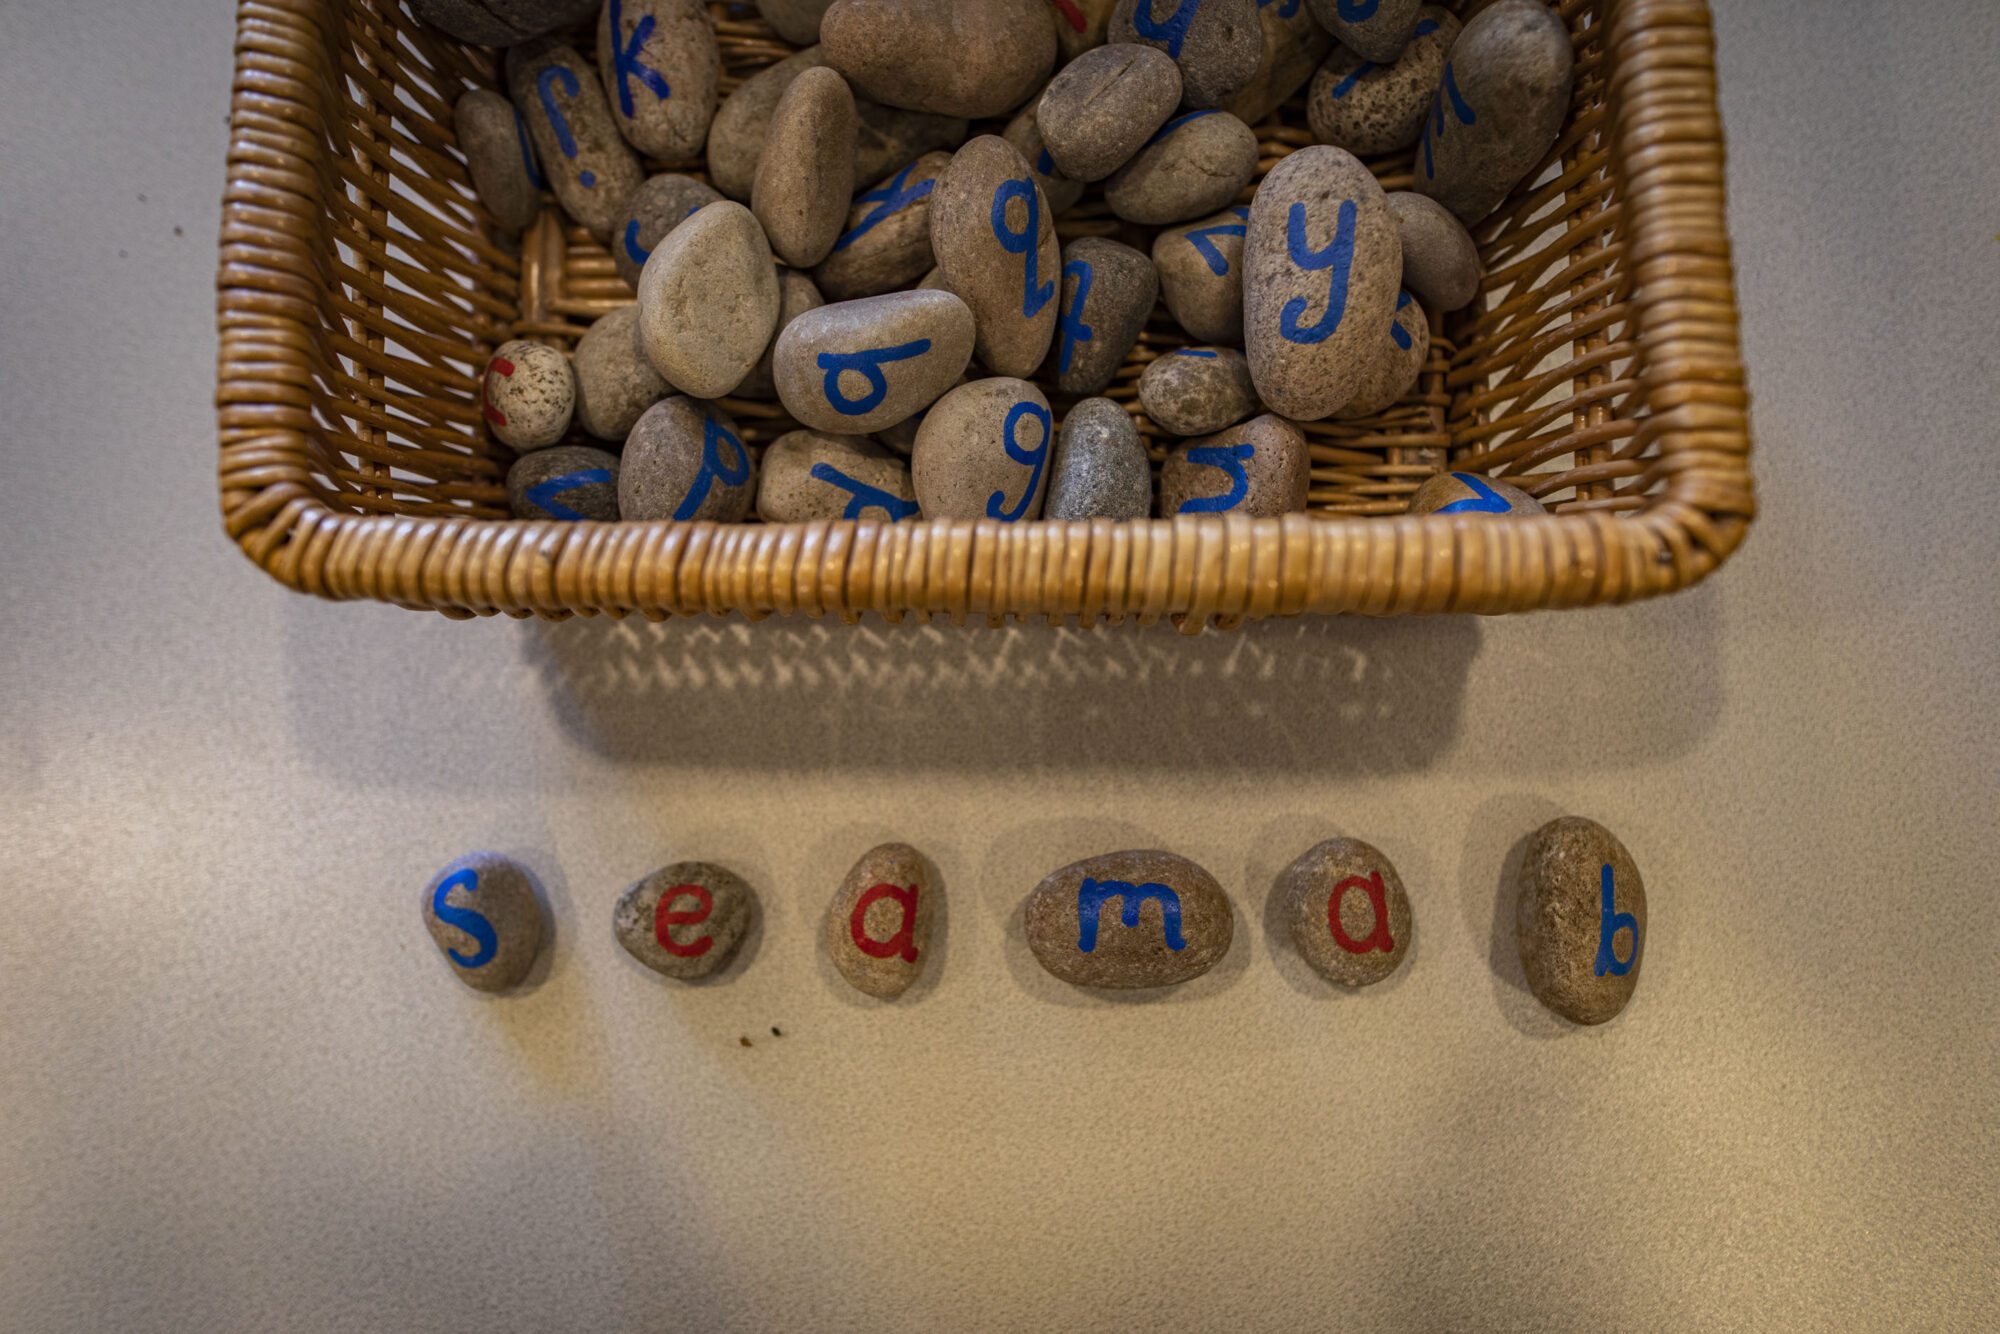 Basket of pebbles with letters painting on them spelling out Seamab.